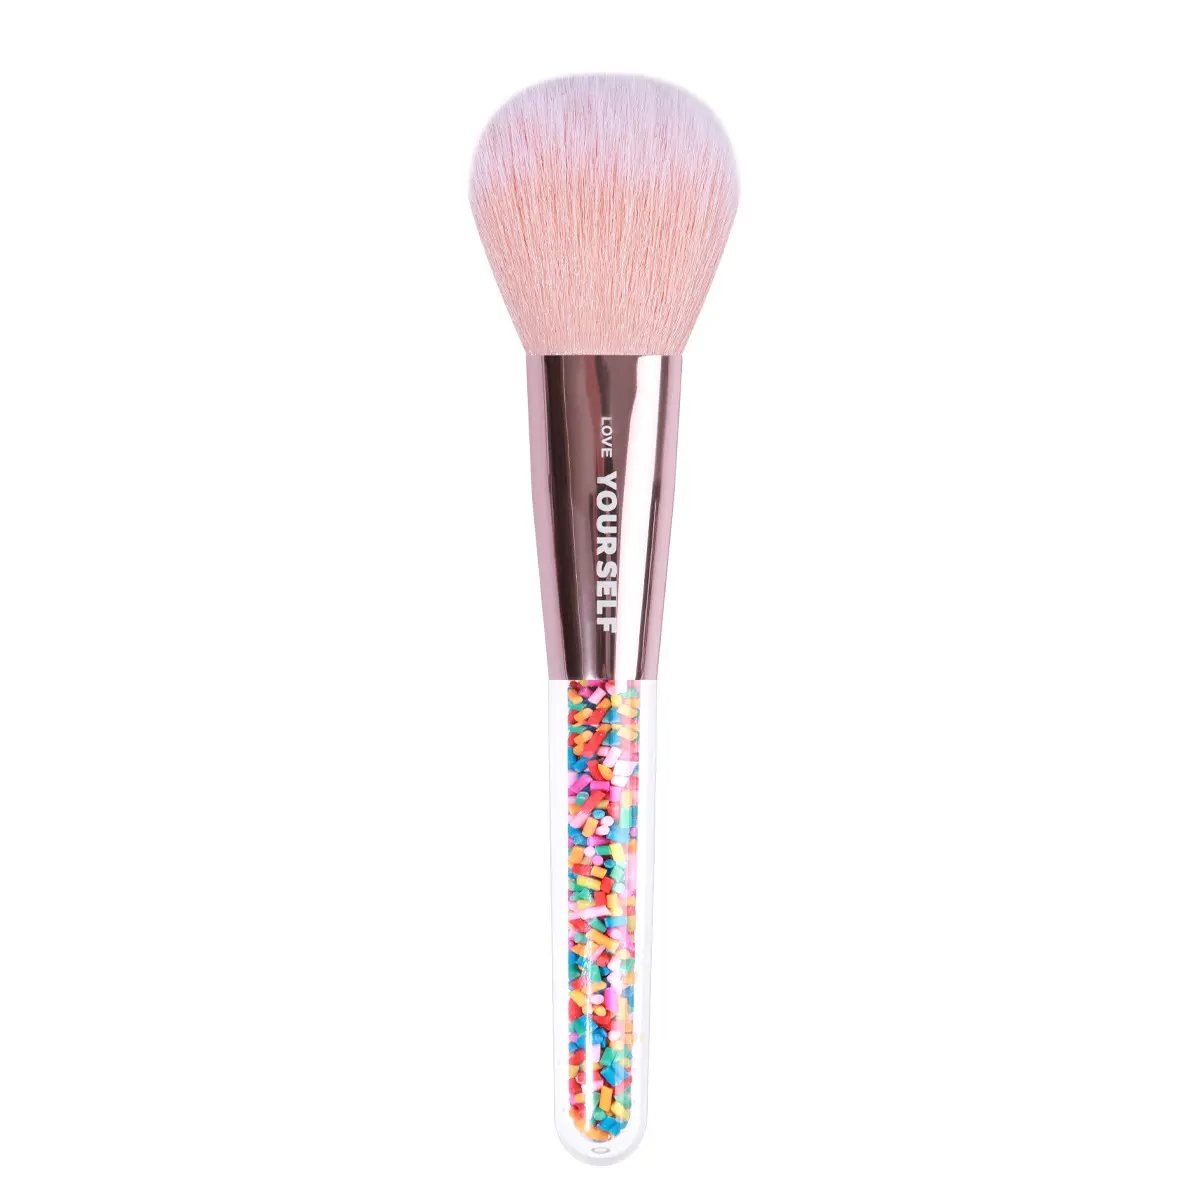 Dropshipping Wooden Foundation Brush in Light Pink and Pink Makeup Brushes Set